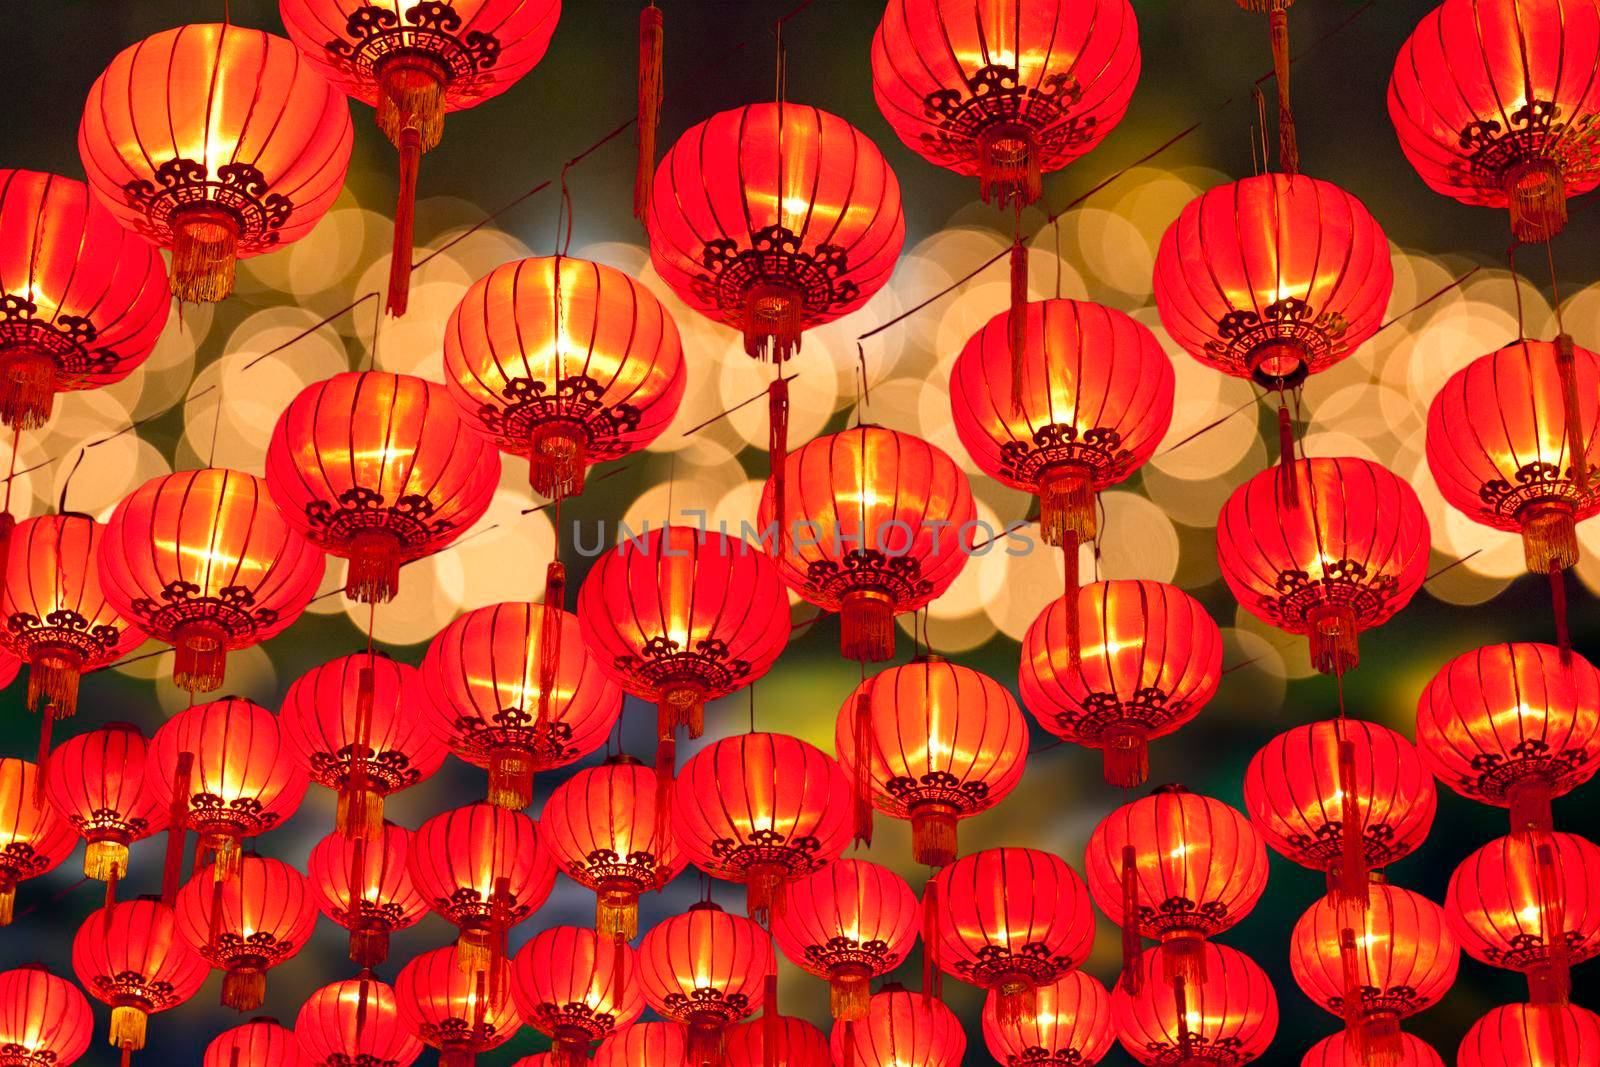 Chinese lanterns in china town. by toa55